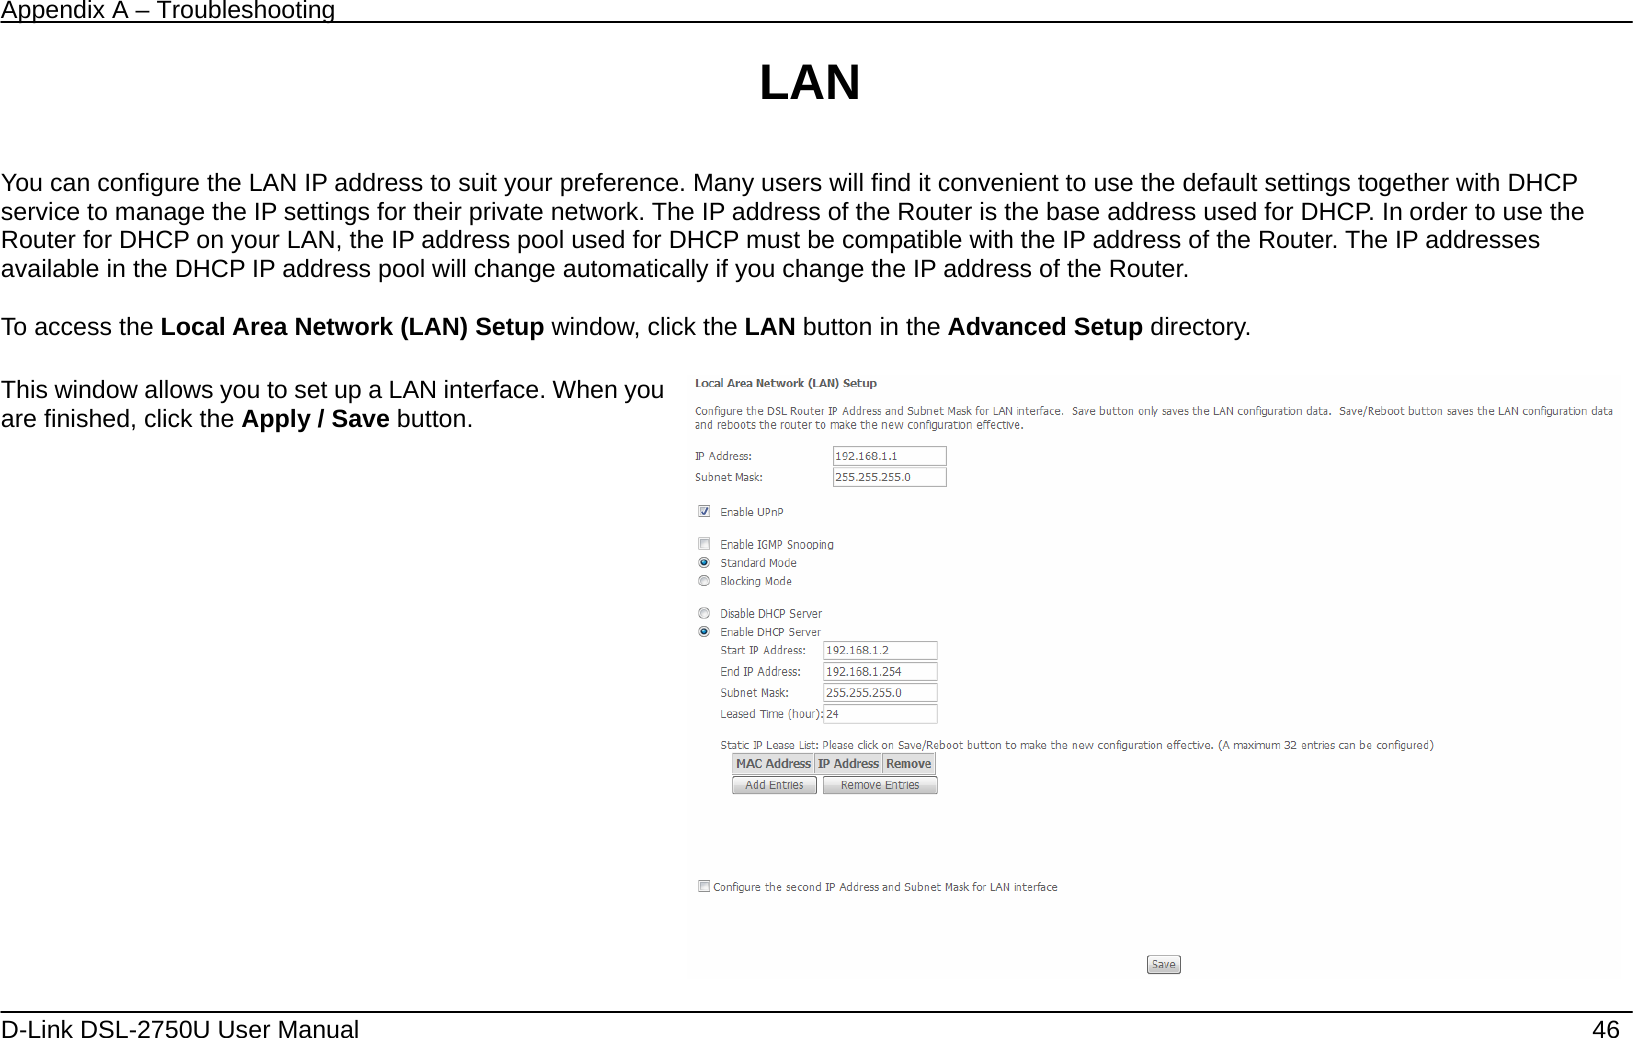 Appendix A – Troubleshooting   D-Link DSL-2750U User Manual    46 LAN  You can configure the LAN IP address to suit your preference. Many users will find it convenient to use the default settings together with DHCP service to manage the IP settings for their private network. The IP address of the Router is the base address used for DHCP. In order to use the Router for DHCP on your LAN, the IP address pool used for DHCP must be compatible with the IP address of the Router. The IP addresses available in the DHCP IP address pool will change automatically if you change the IP address of the Router.      To access the Local Area Network (LAN) Setup window, click the LAN button in the Advanced Setup directory.  This window allows you to set up a LAN interface. When you are finished, click the Apply / Save button.    